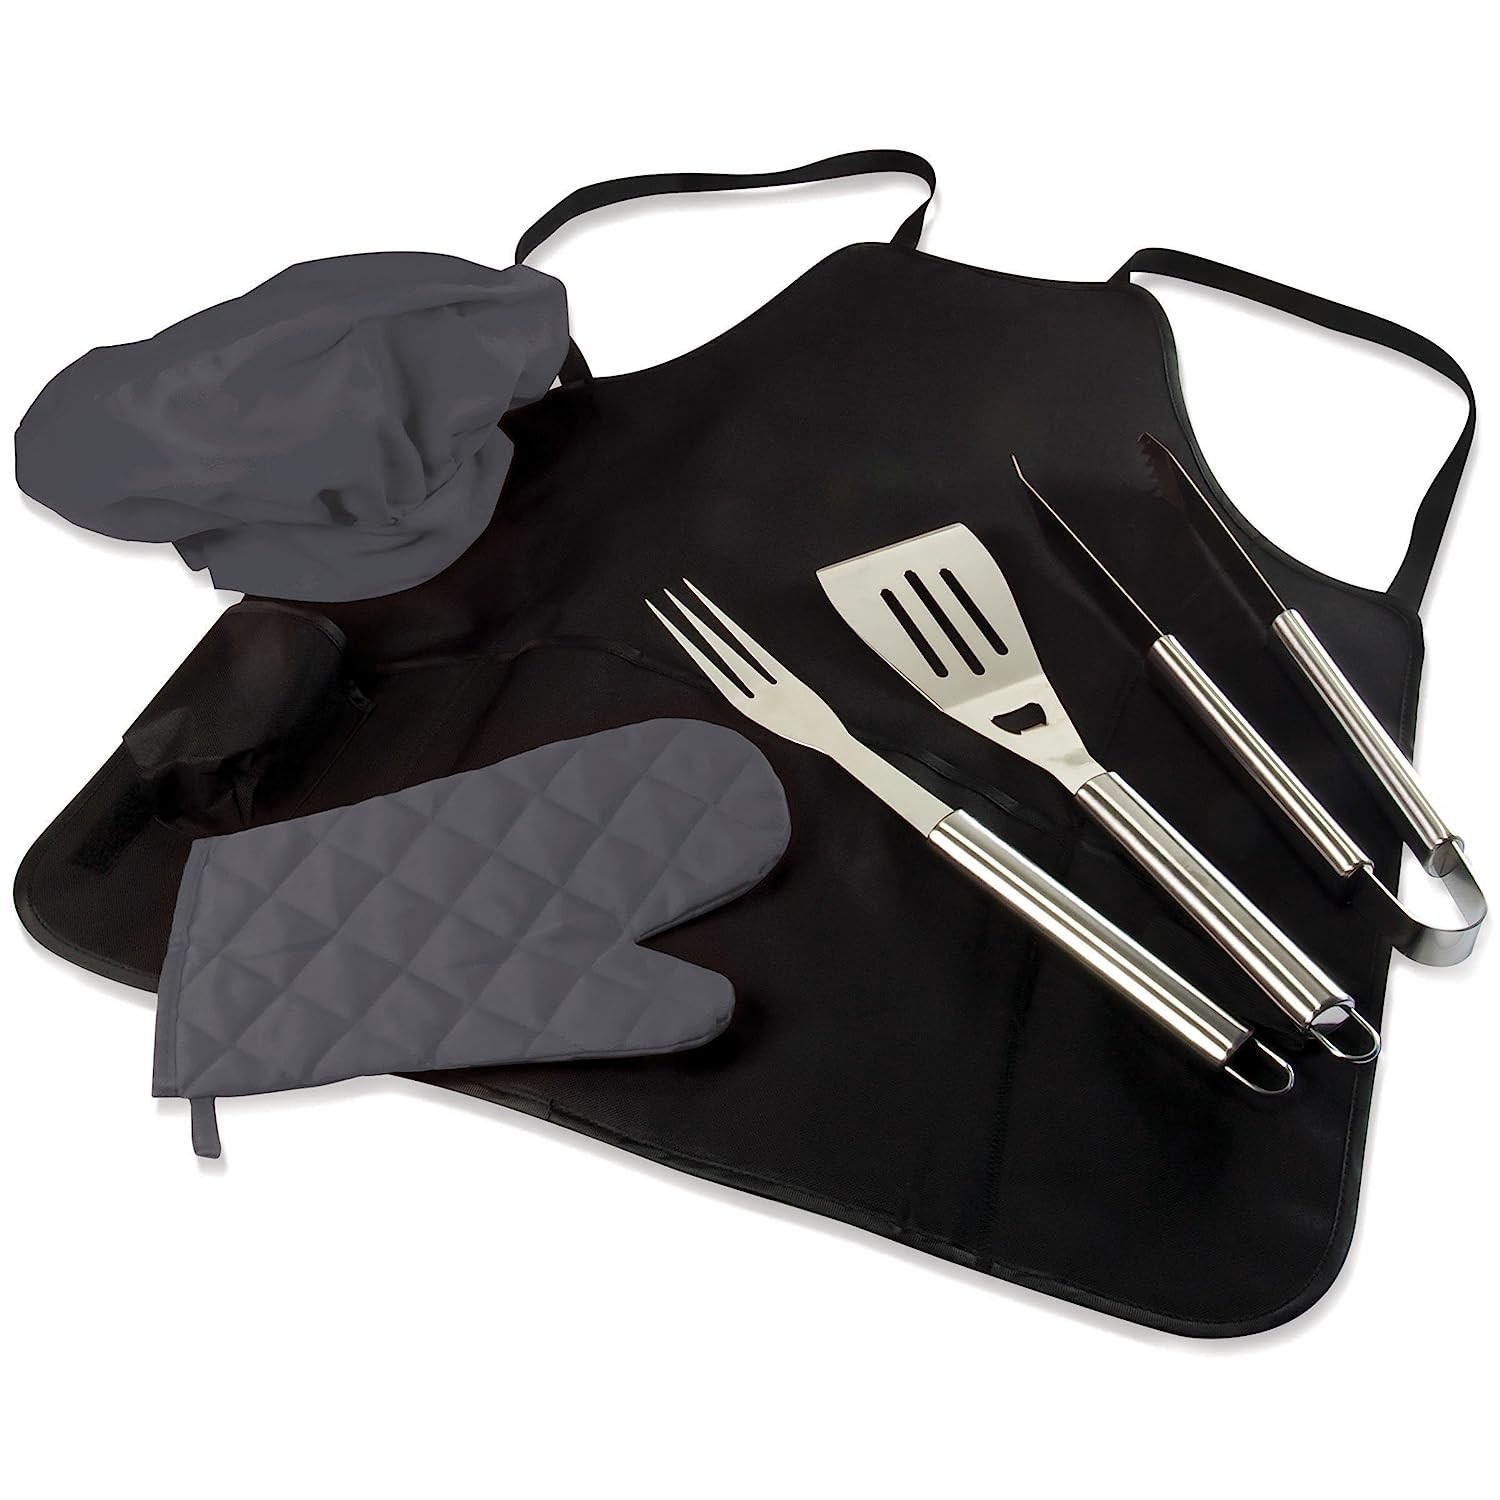 BBQ Apron Tote Pro Grill Set, (Black with Gray Accents)